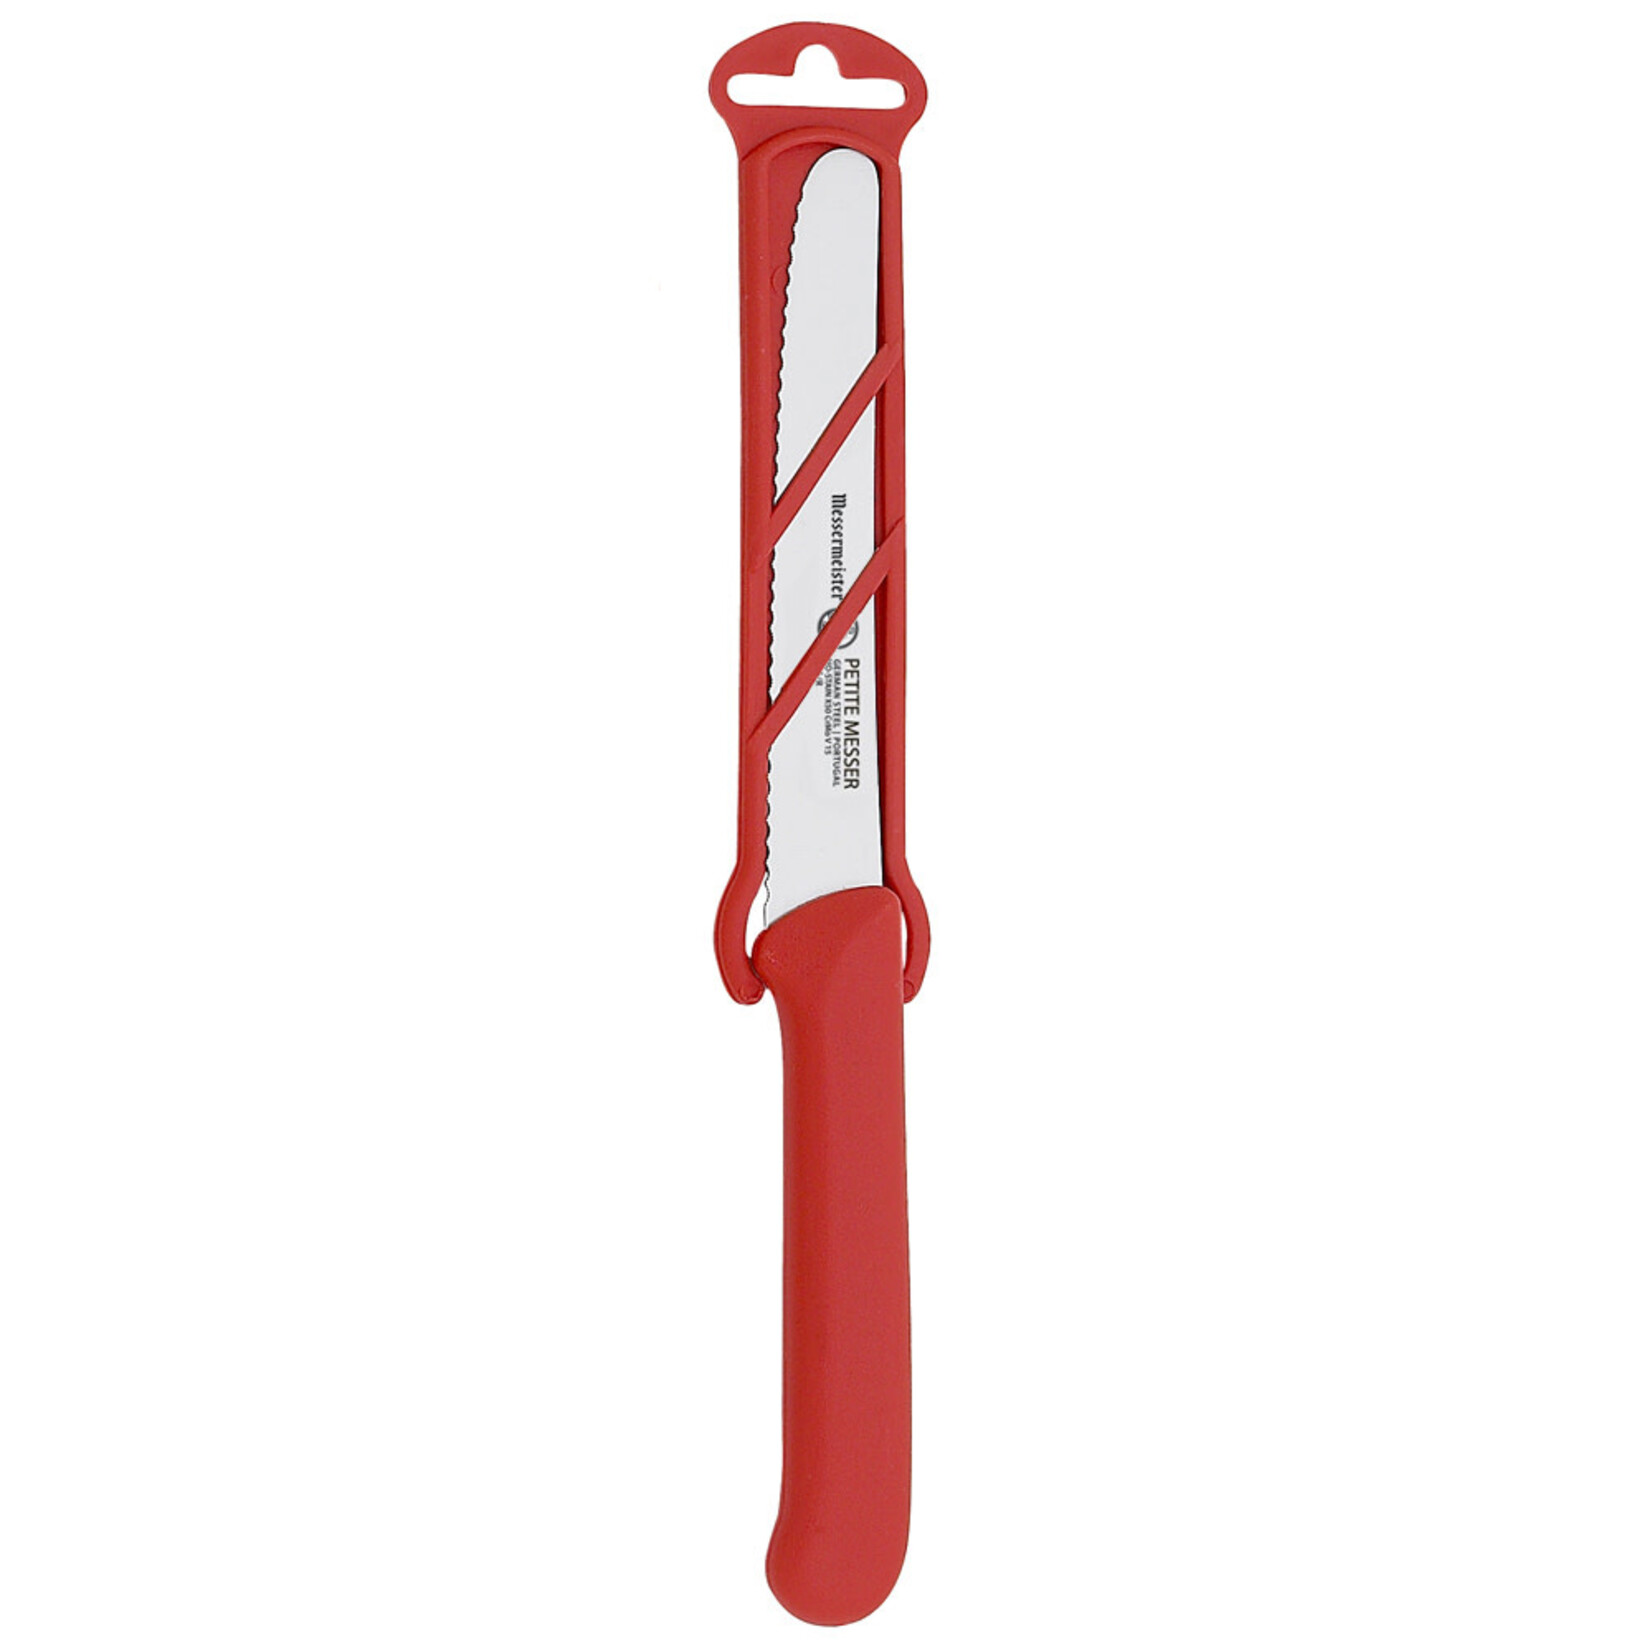 Messermeister 4.5 inch Serrated Tomato Knife with Matching Sheath  in Red